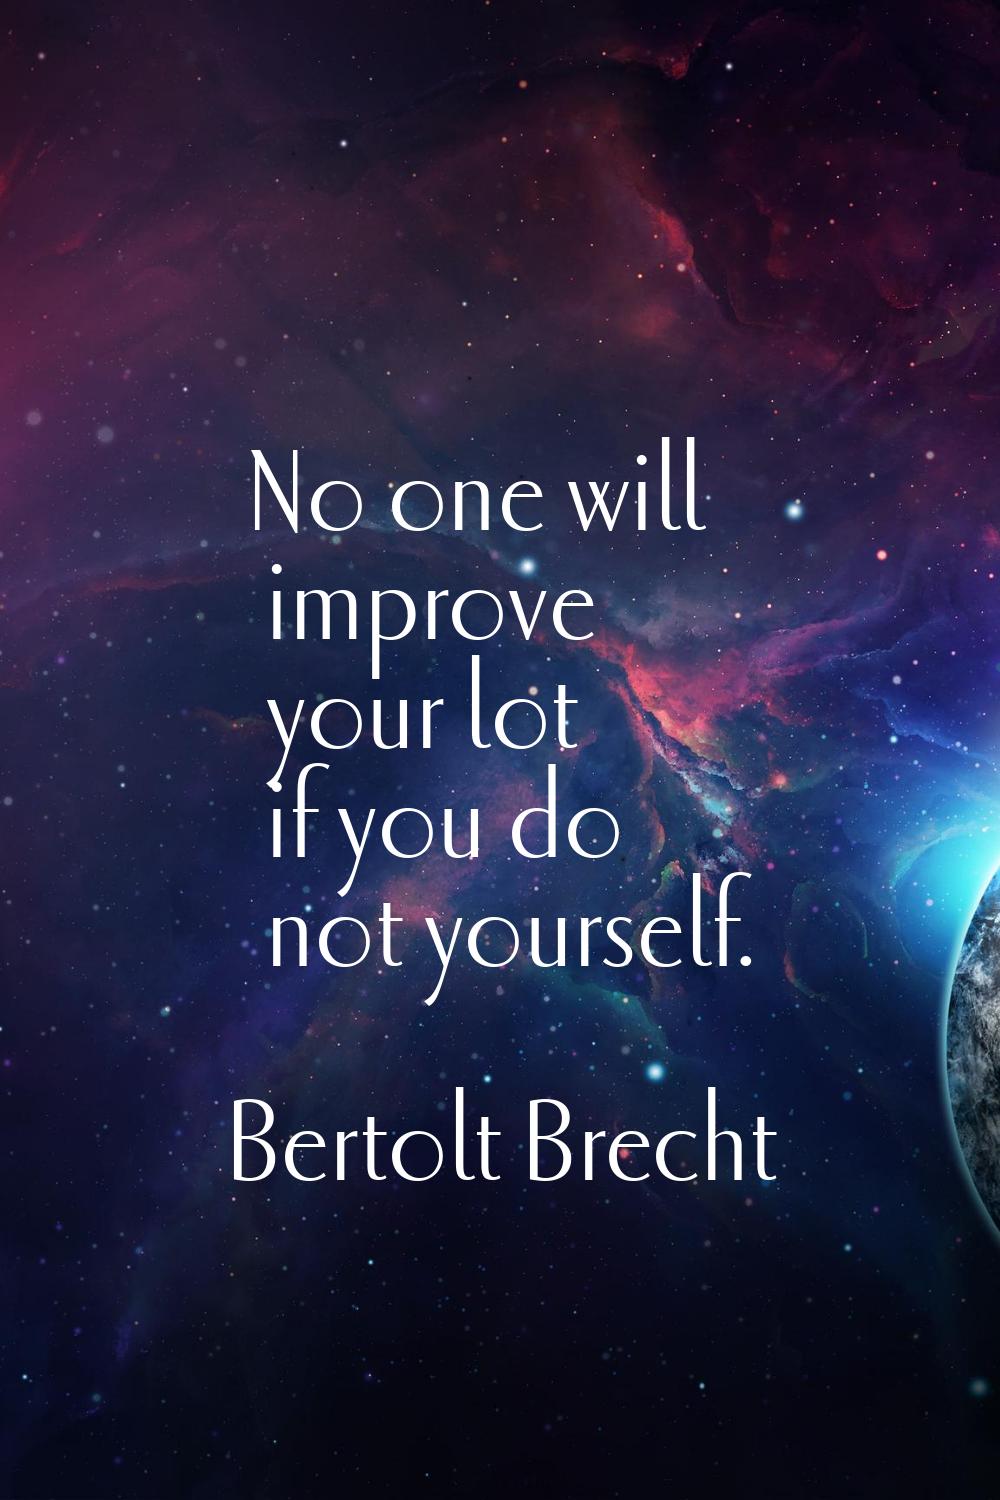 No one will improve your lot if you do not yourself.